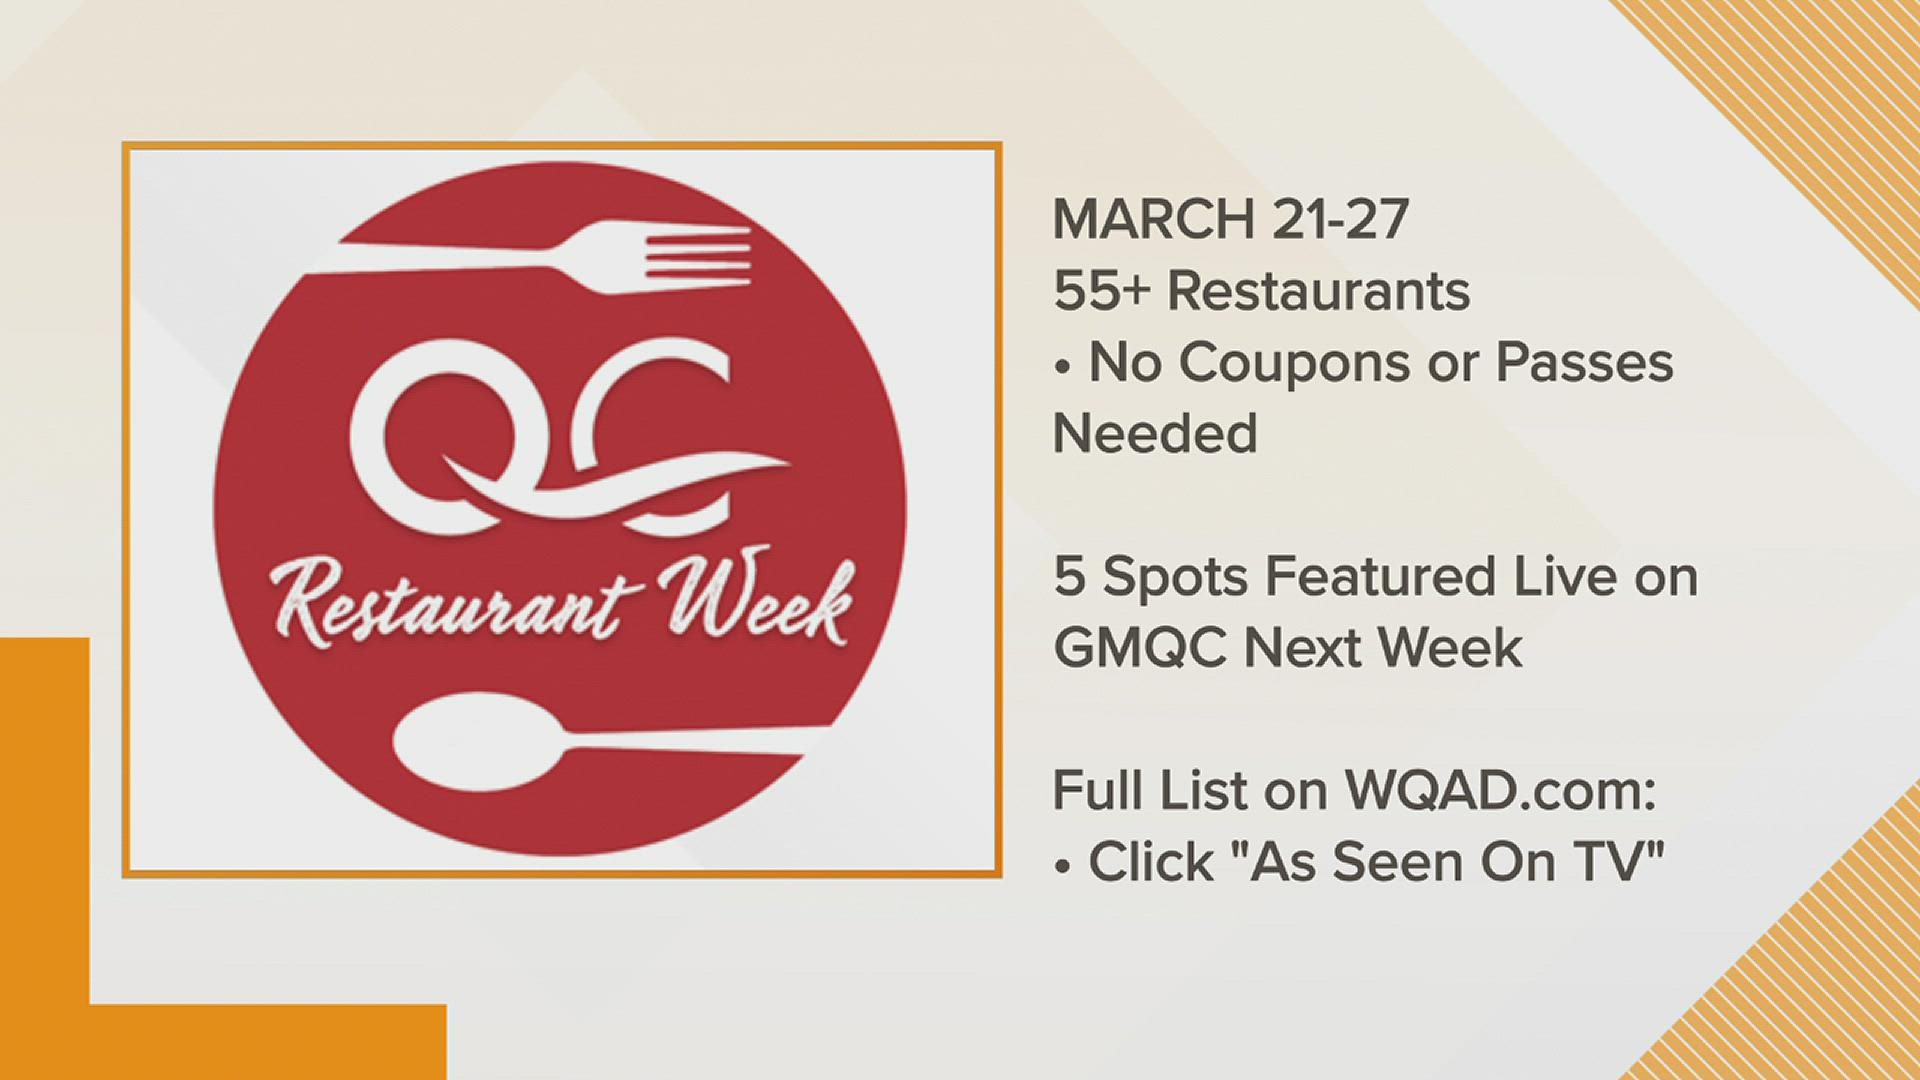 Celebrate your favorite local restaurants or find new ones during this year's QC Restaurant Week, running March 21-27.